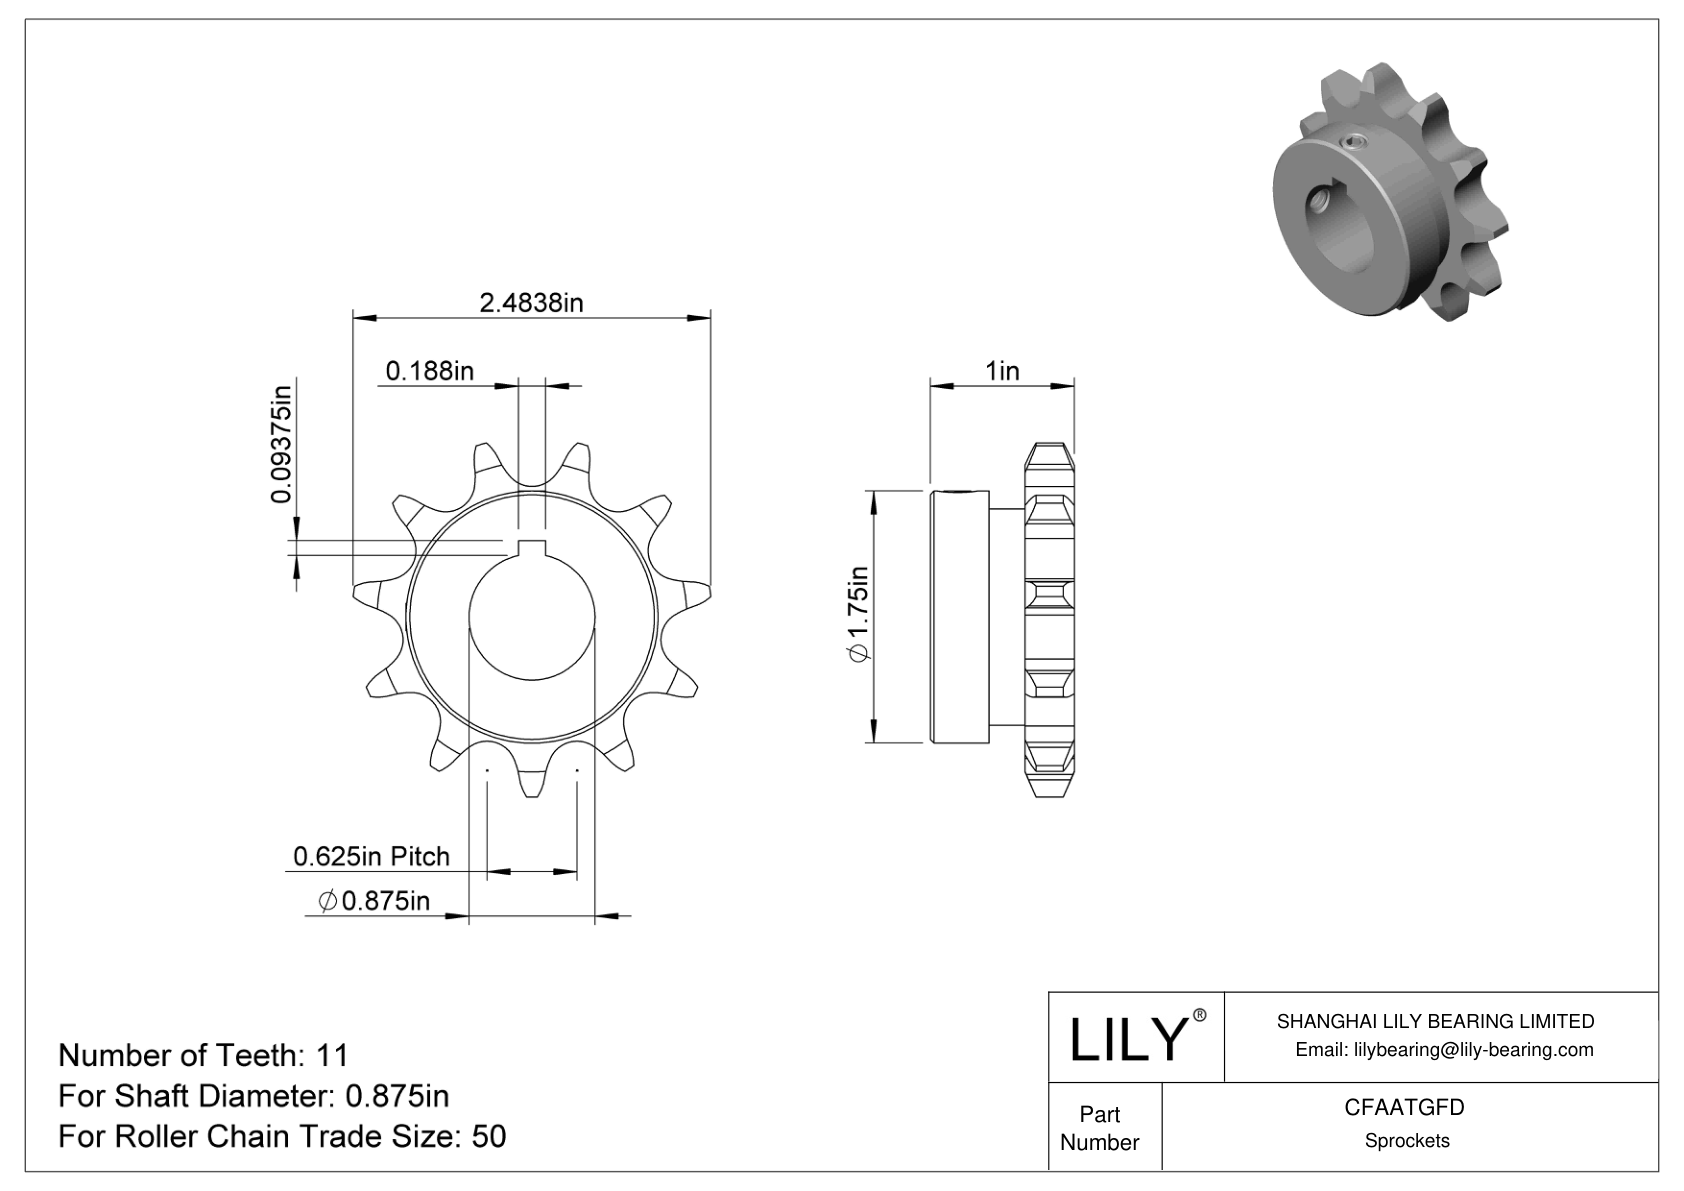 CFAATGFD Wear-Resistant Sprockets for ANSI Roller Chain cad drawing